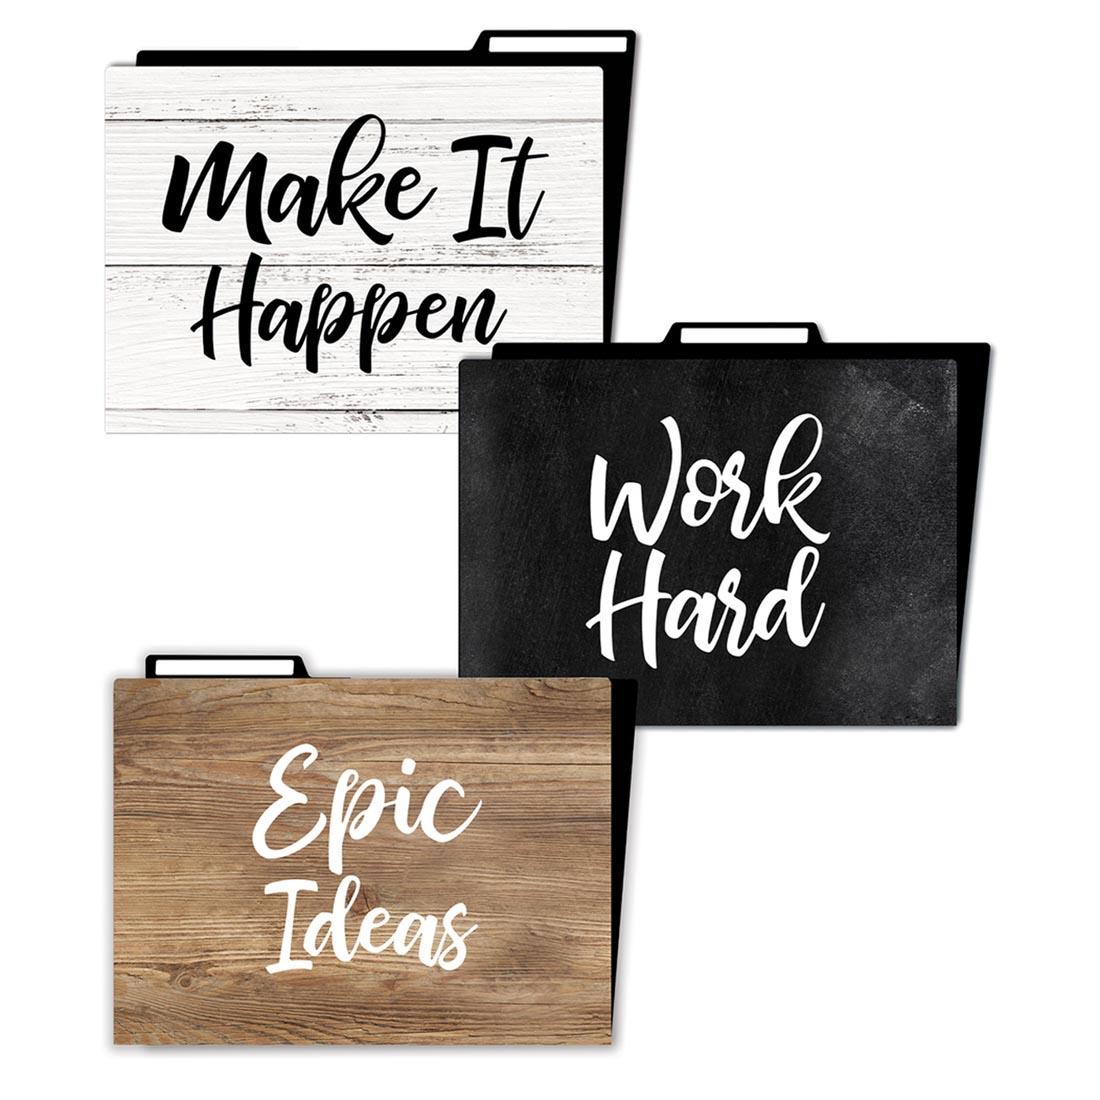 File Folders from the Industrial Cafe collection with sayings like Make it Happen, Work Hard and Epic Ideas